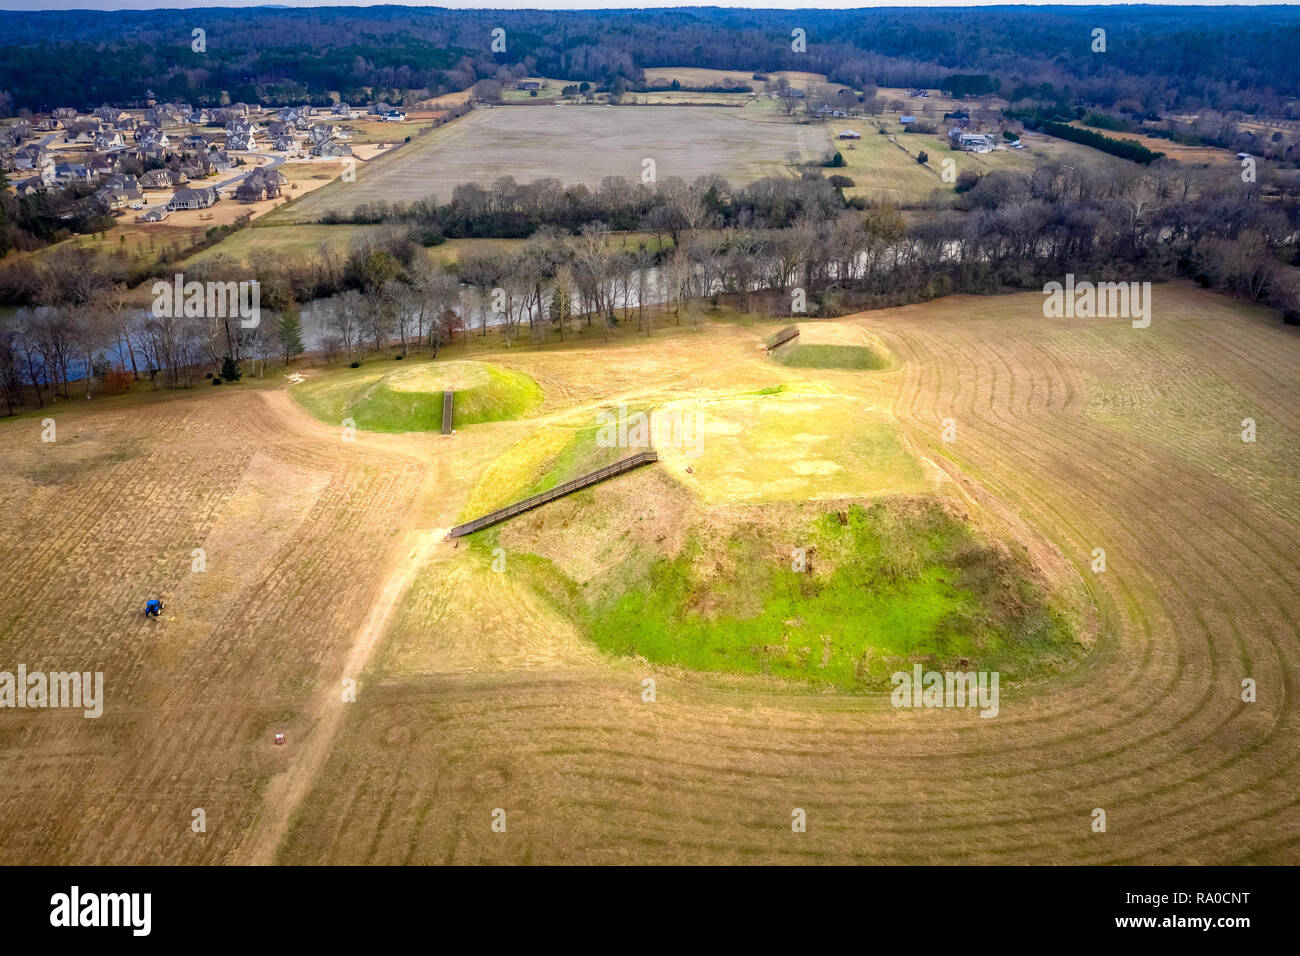 Aerial view of Etowah Indian Mounds Historic Site in Cartersville Georgia Stock Photo